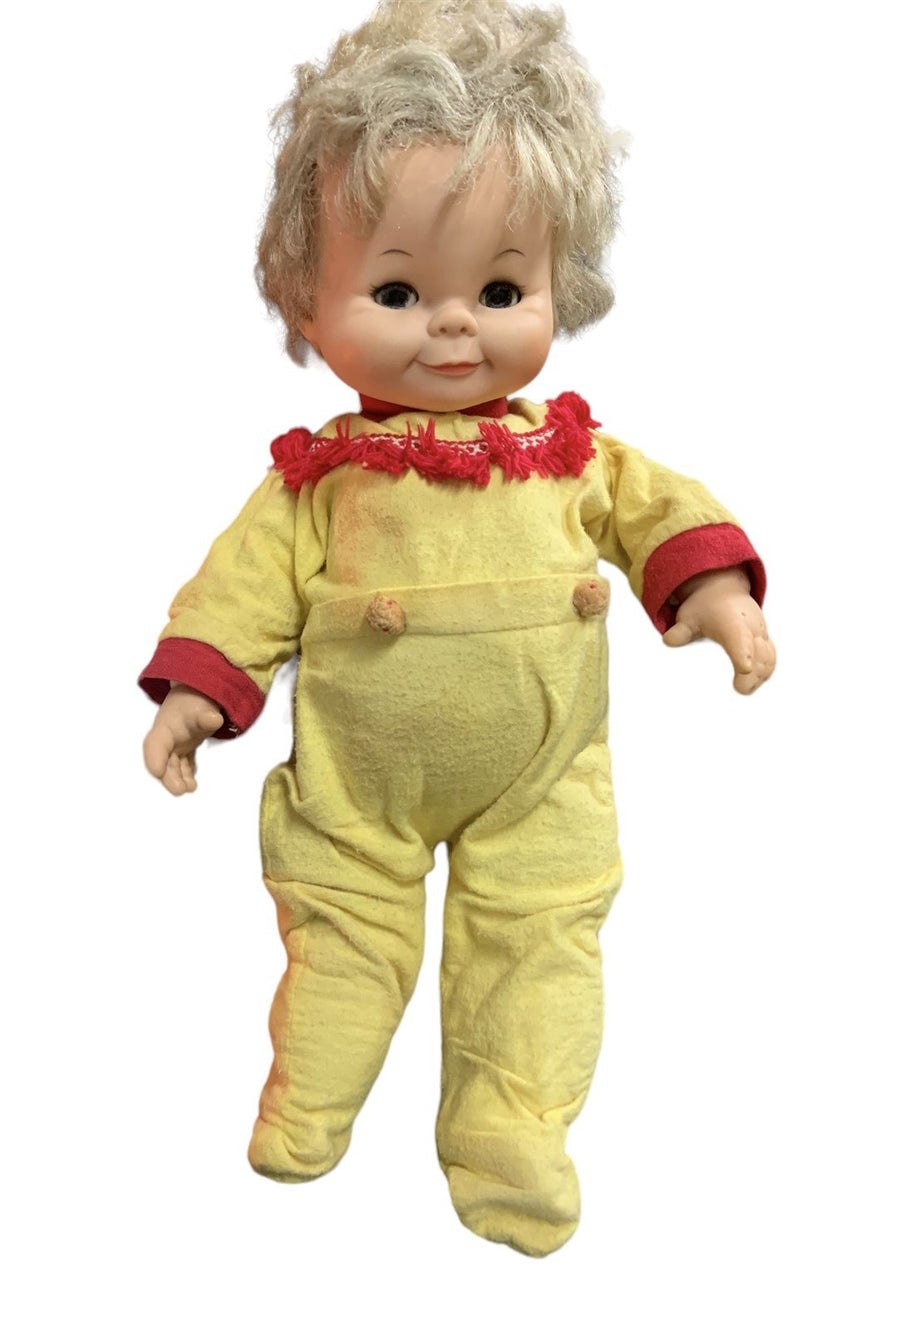 Jolly Toys Doll Vintage Red Yellow Onesie Smiling Blonde Rooted Vinyl Foam Body